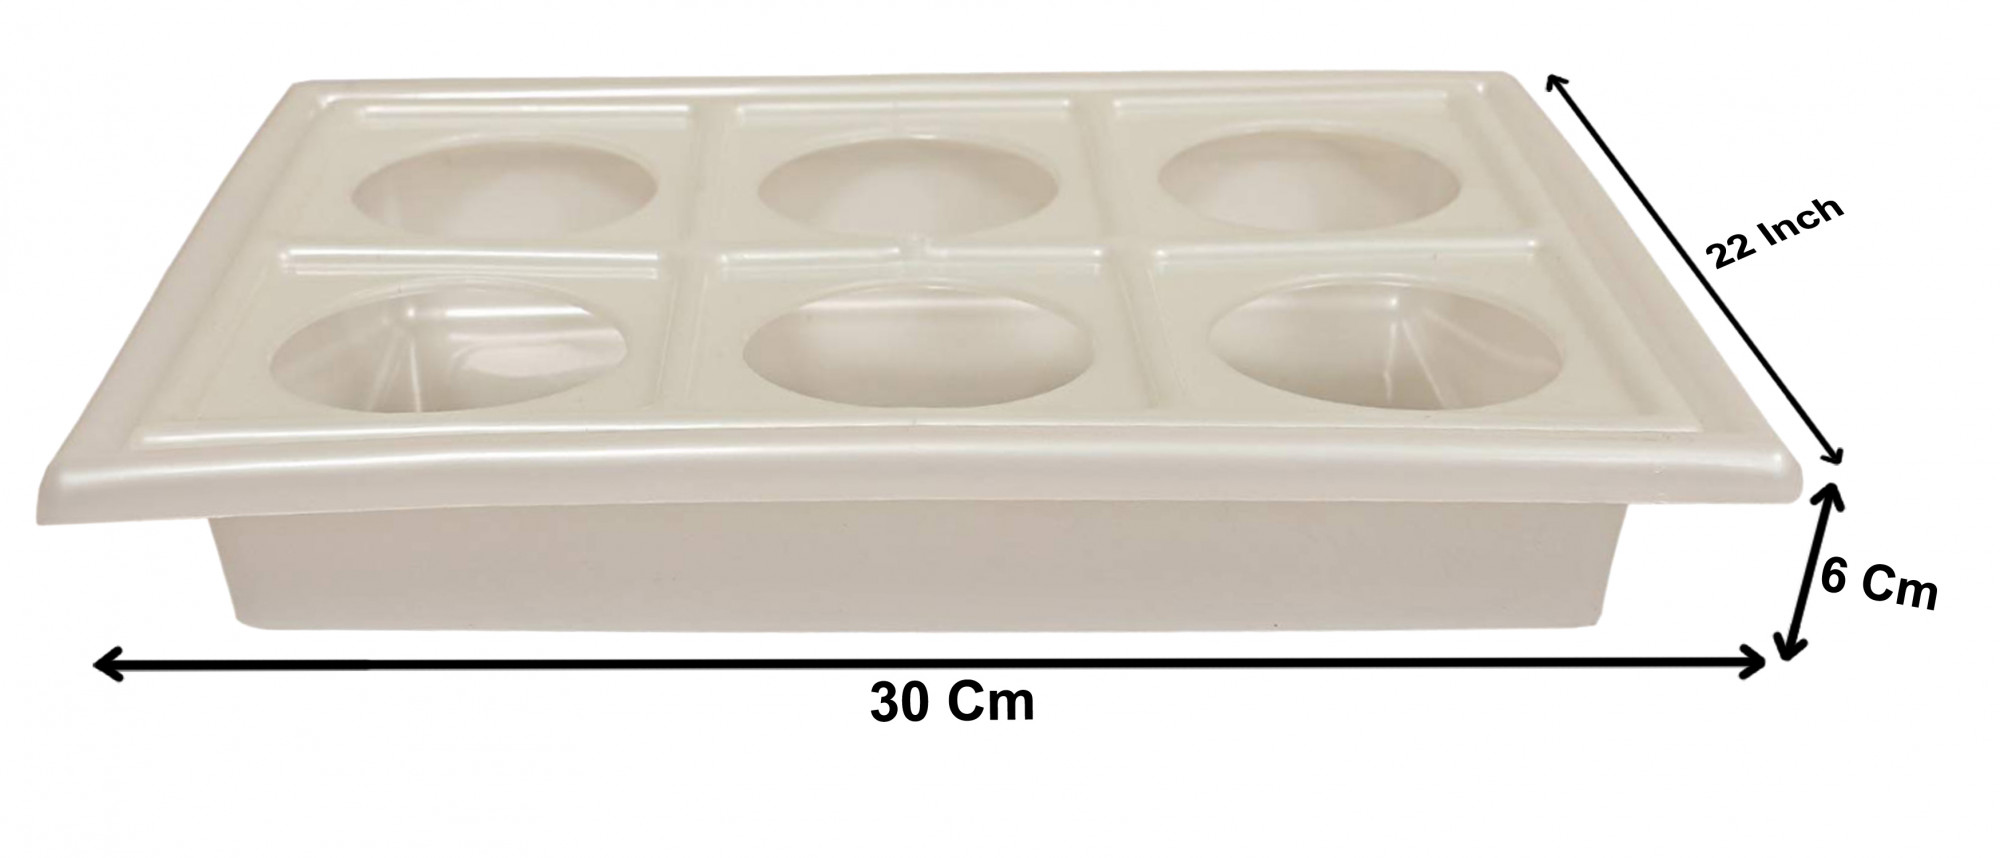 Kuber Industries Tray with Cutout Handles, Cup Display for Kitchenware, Plastic Glass Holder, One Size, 6 Slots (White)